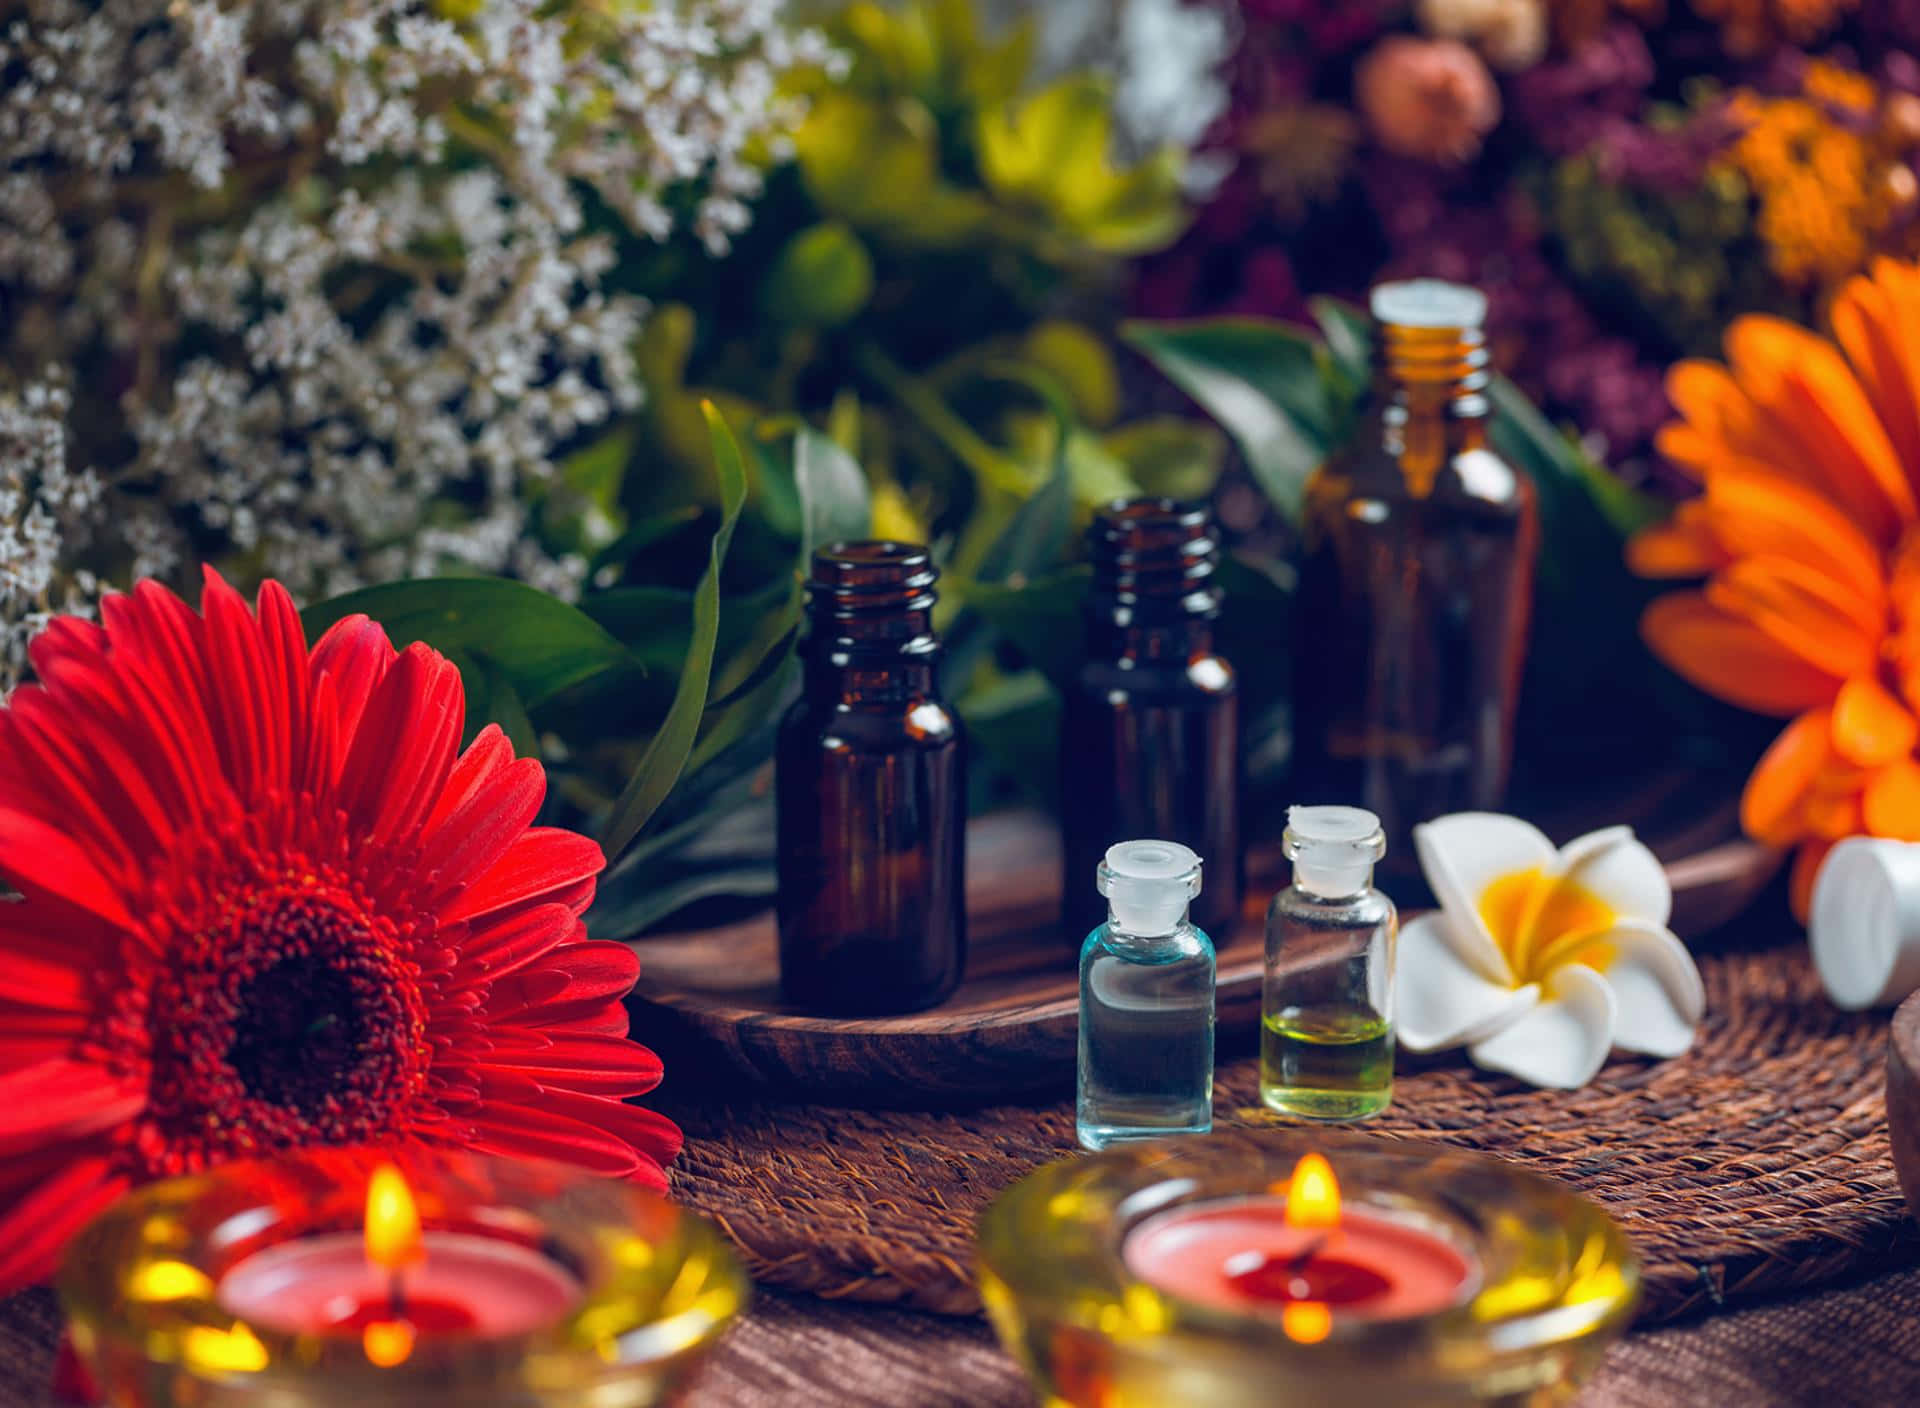 "Release Stress and Find Relief with Aromatherapy" Wallpaper